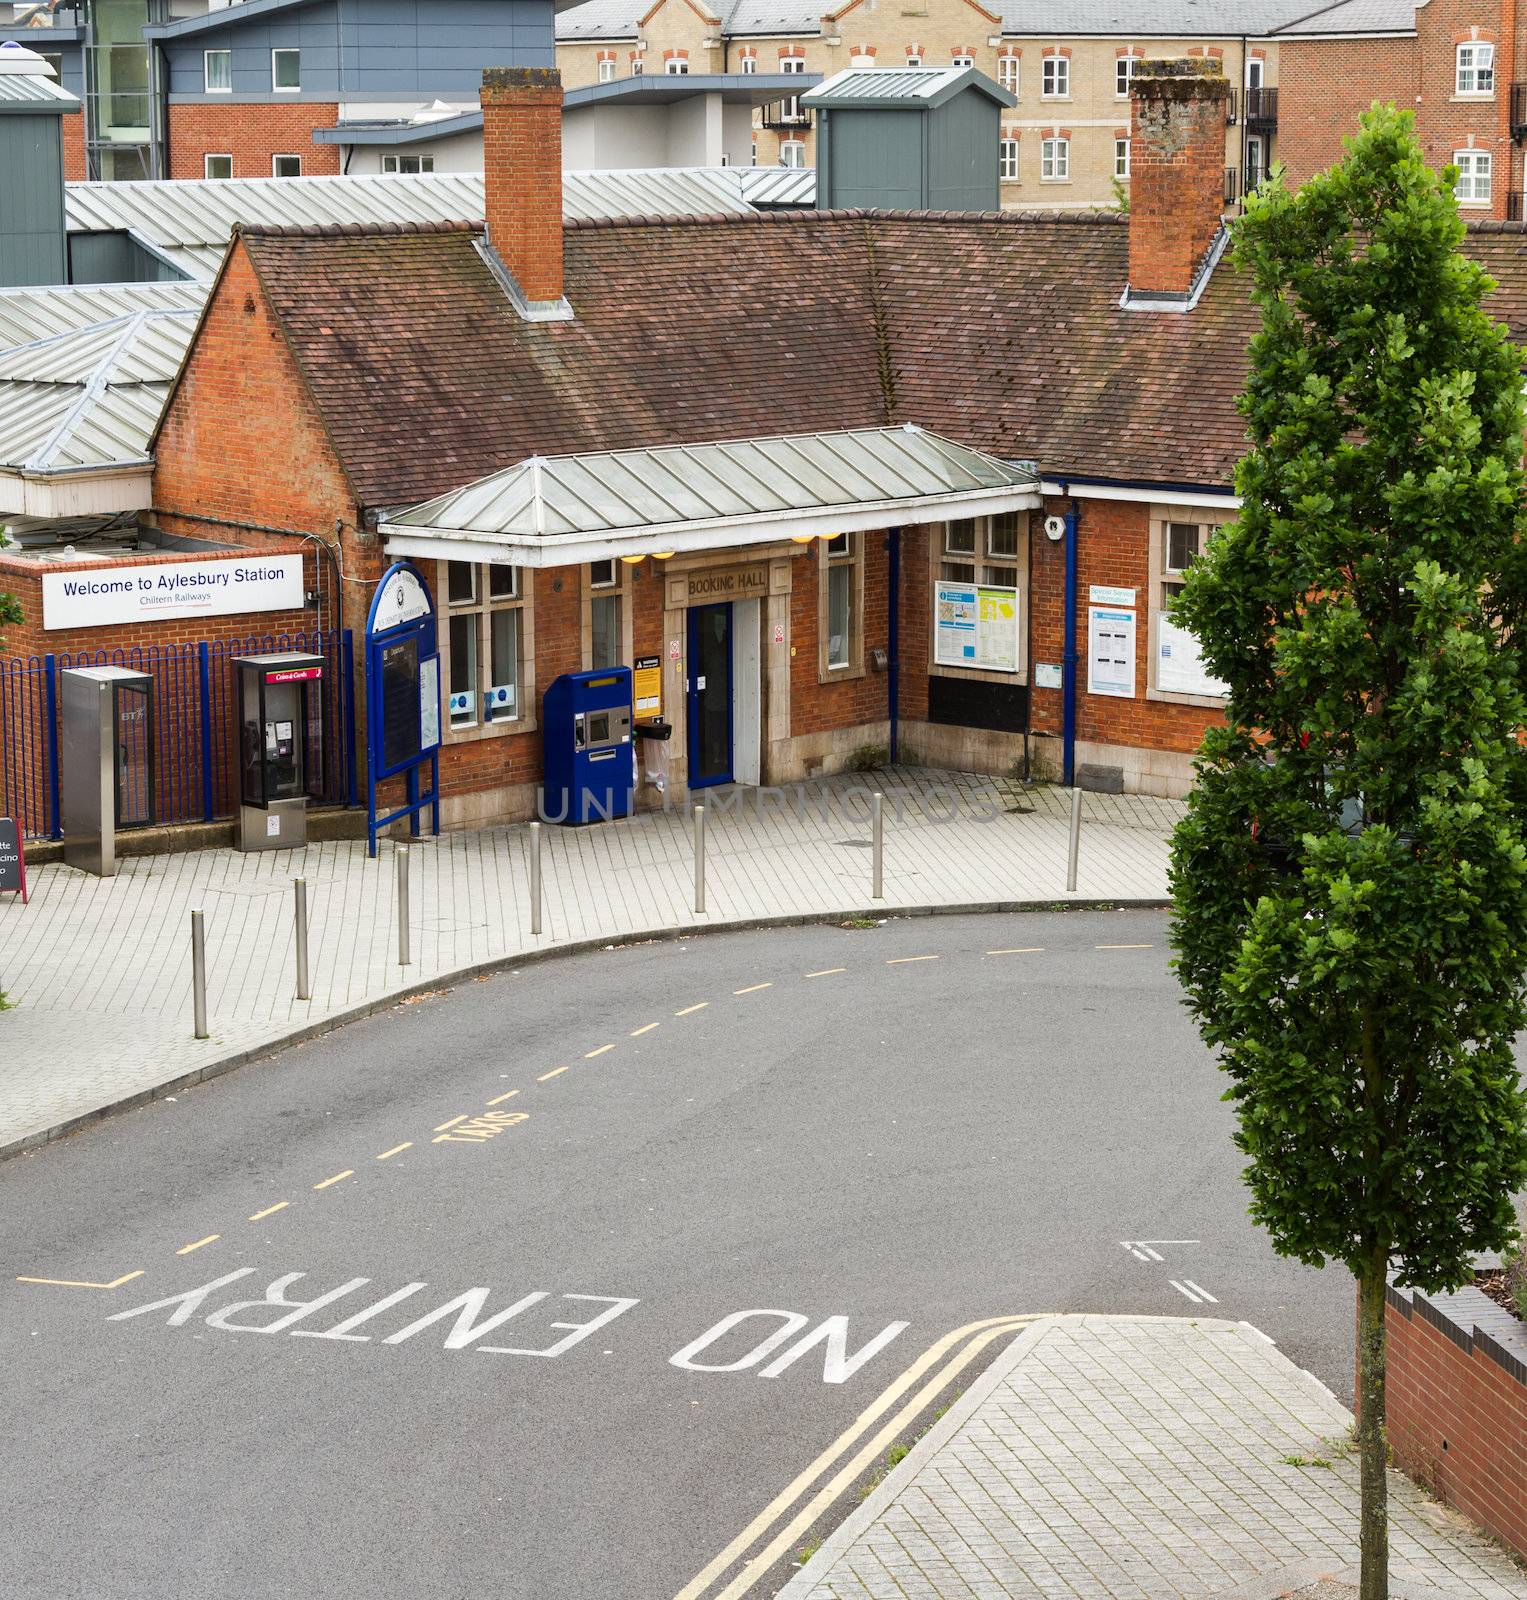 AYLESBURY, ENGLAND - JULY 21: The entrance to Aylesbury Station, Buckinghamshire on July 21, 2014. The station is served by Chiltern Railways and there are plans to re-open the line to Milton Keynes via Bletchley.